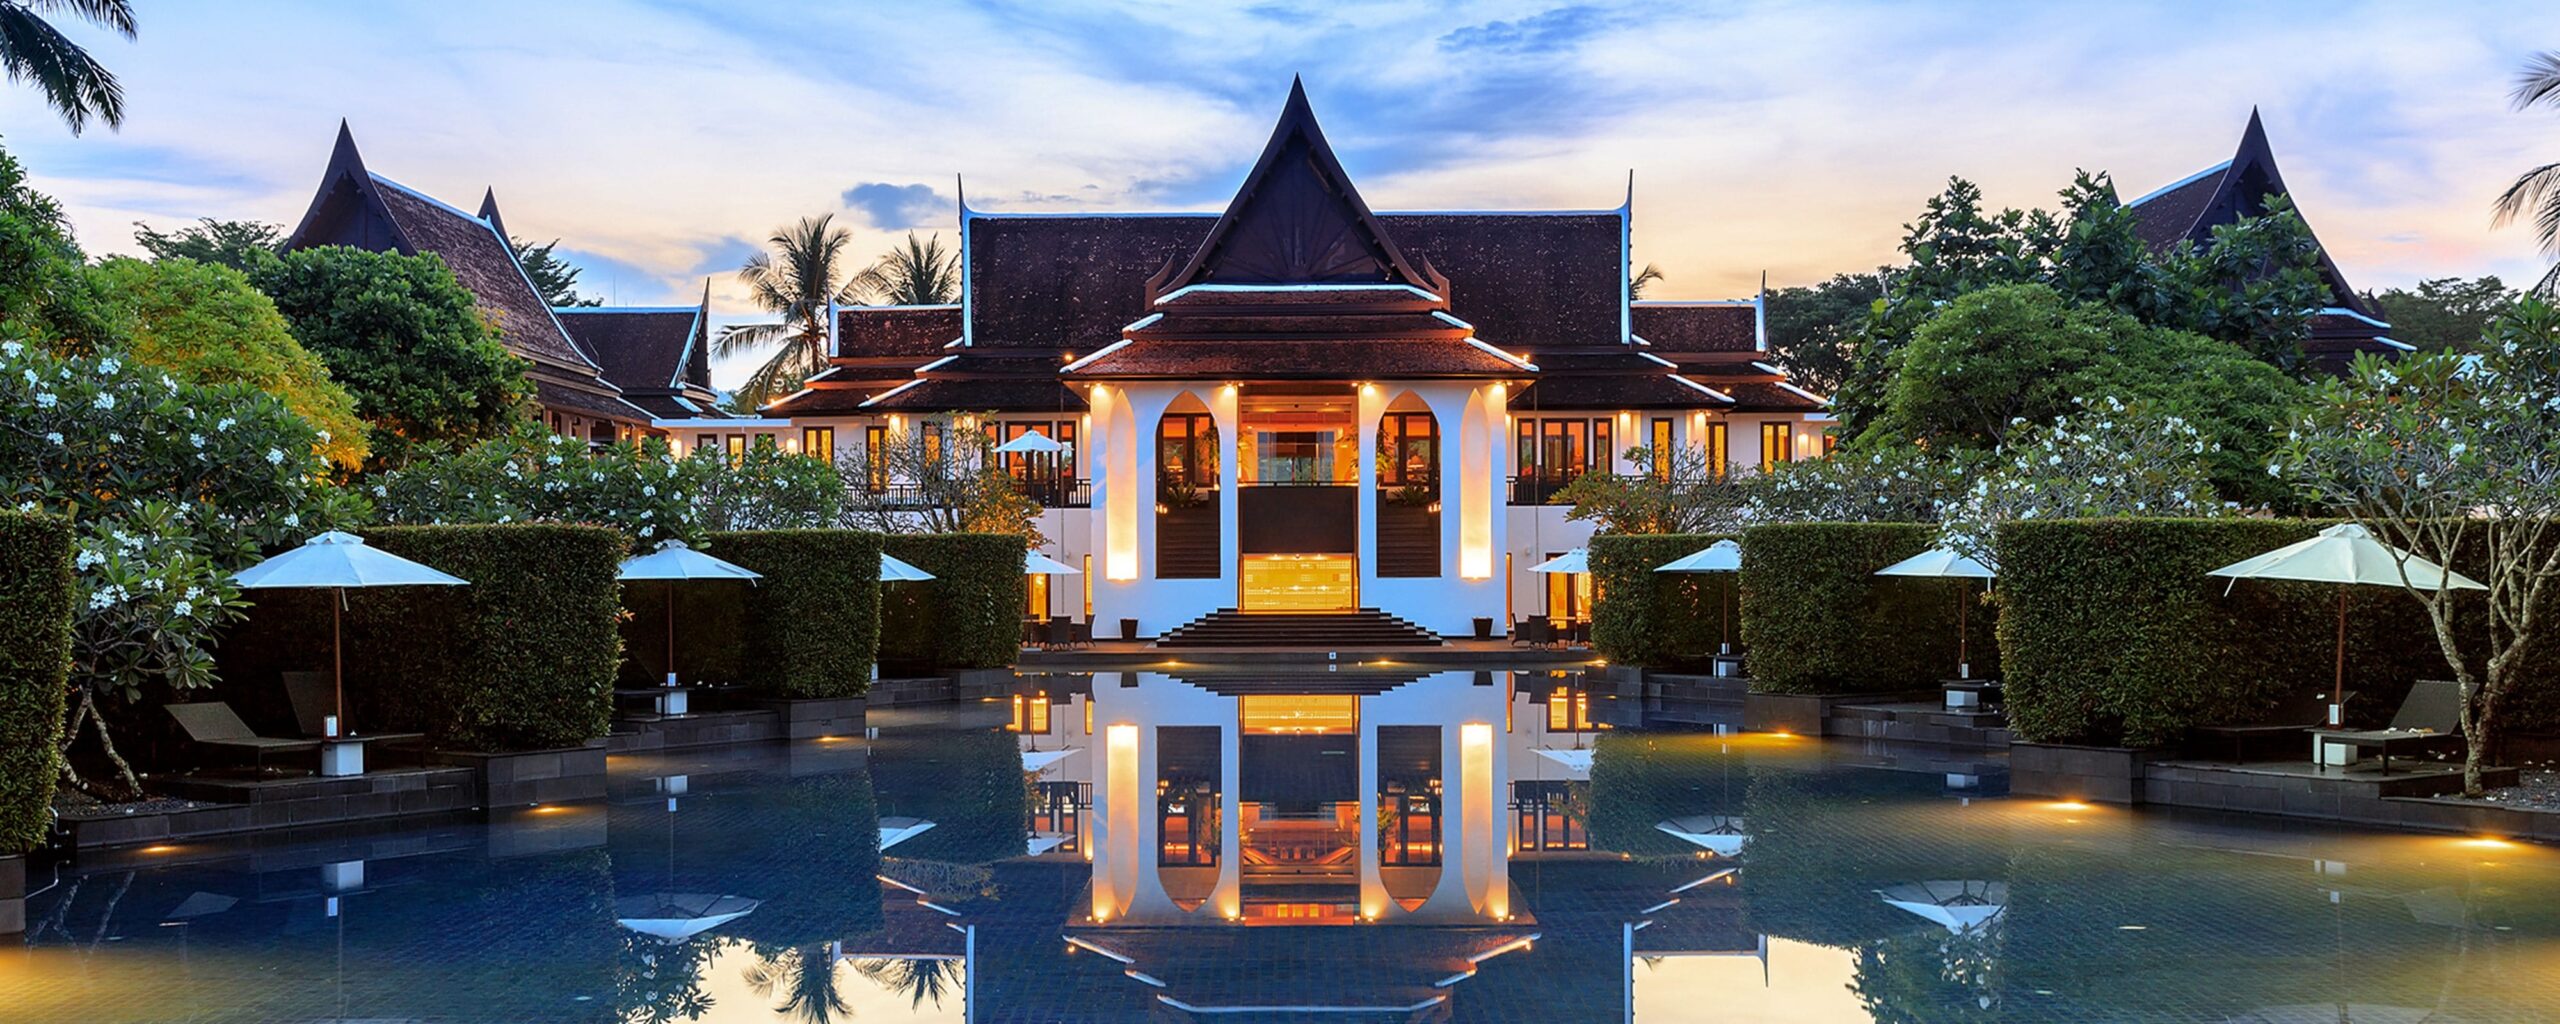 JW Marriott Khao Lak Resort & Spa opens at Southern Thailand; plans to add sister property soon